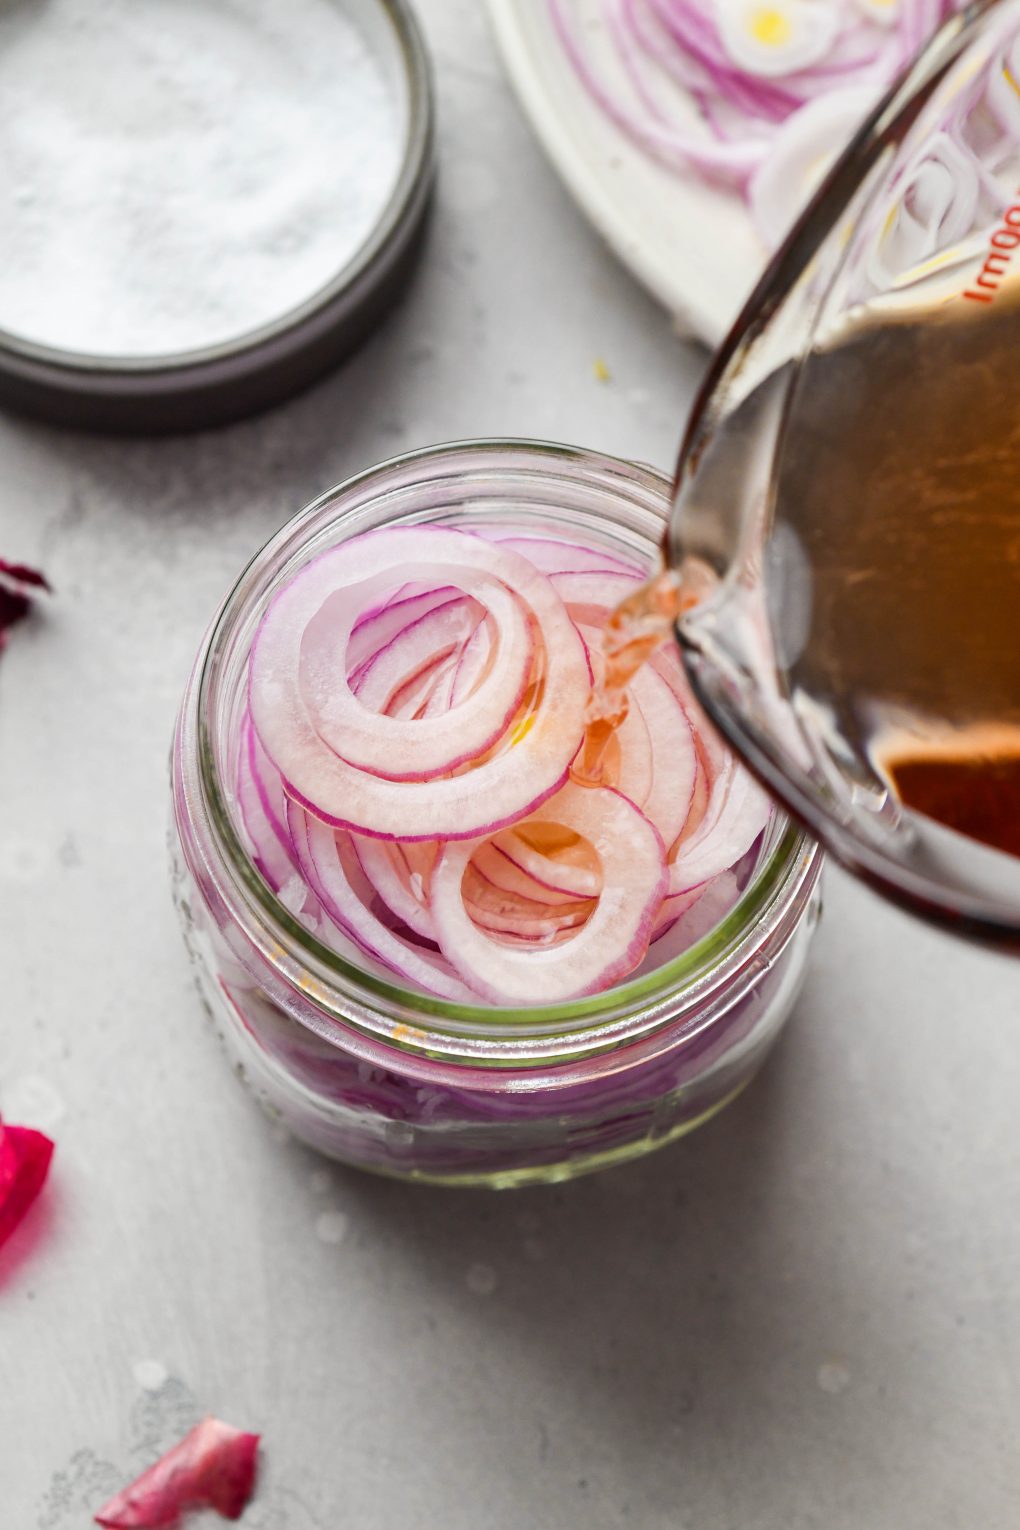 A 45 degree angle shot of a medium sized glass jar filled with bright pink thinly sliced red onion and a glass measuring cup pouring pickling liquid into the jar.